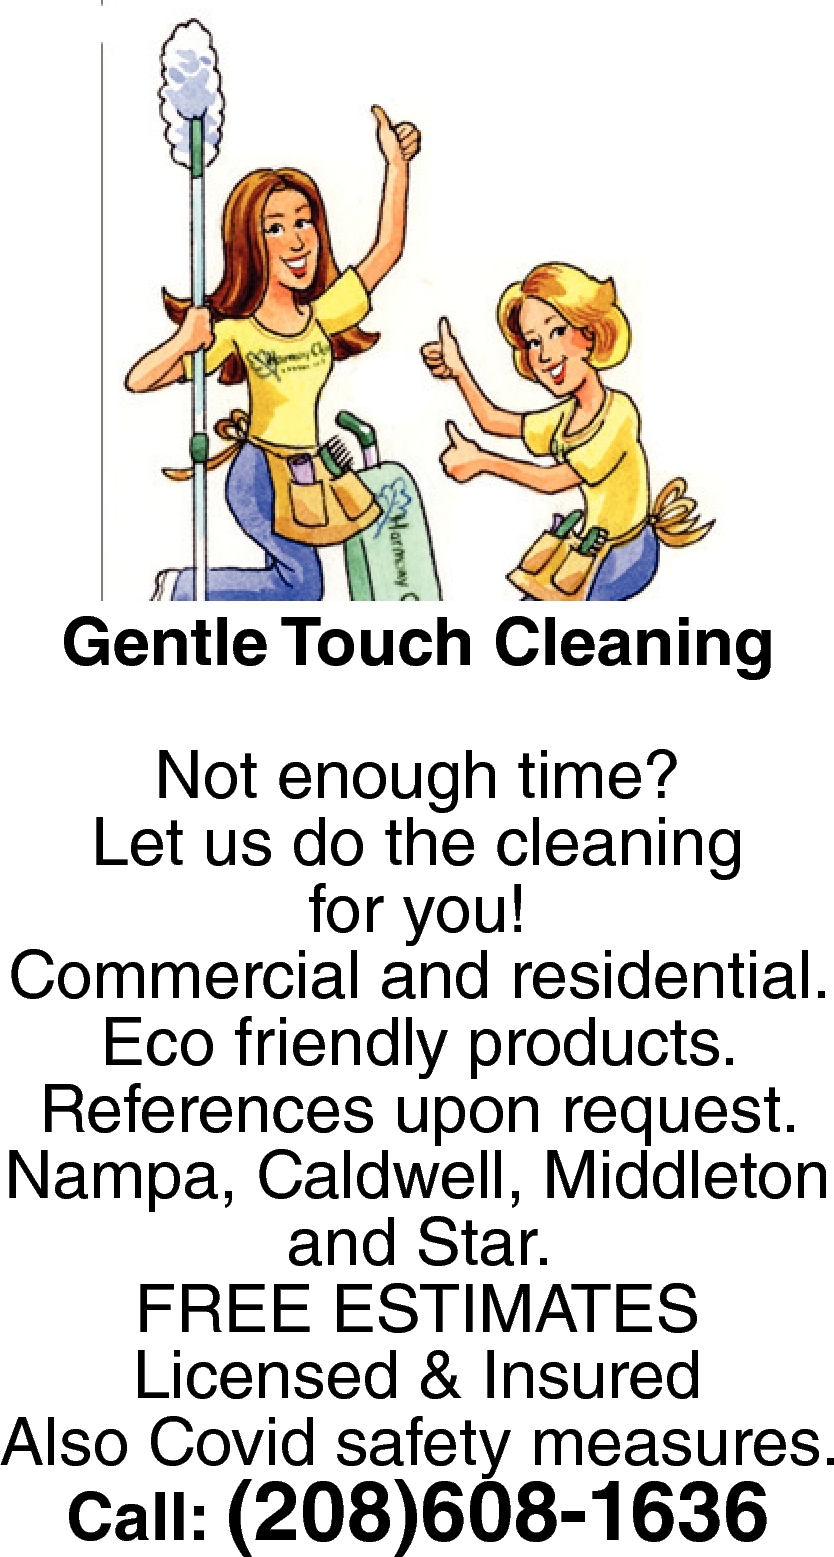 Let Us Do the Cleaning for You!